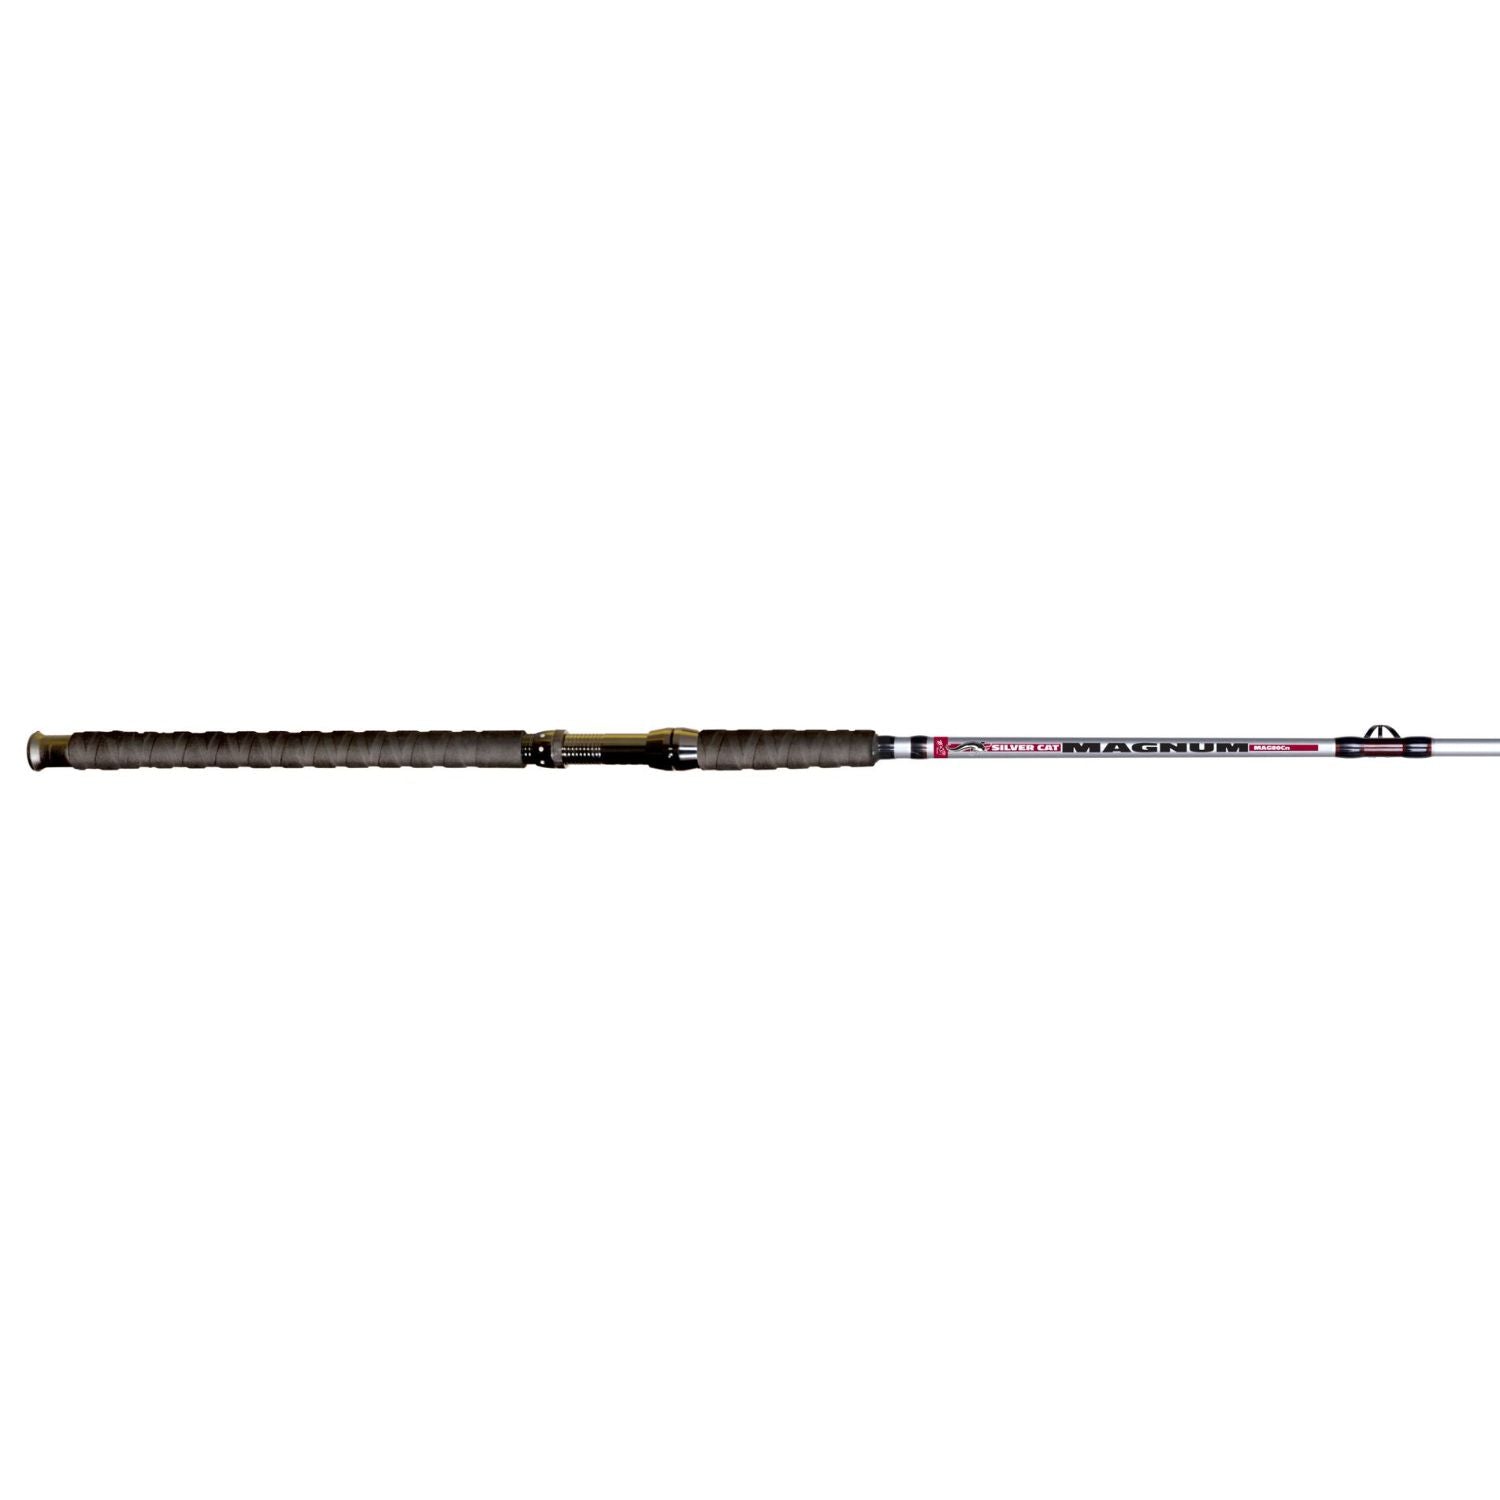 BnM Silver Cat Magnum Rod – Fishing in the USA